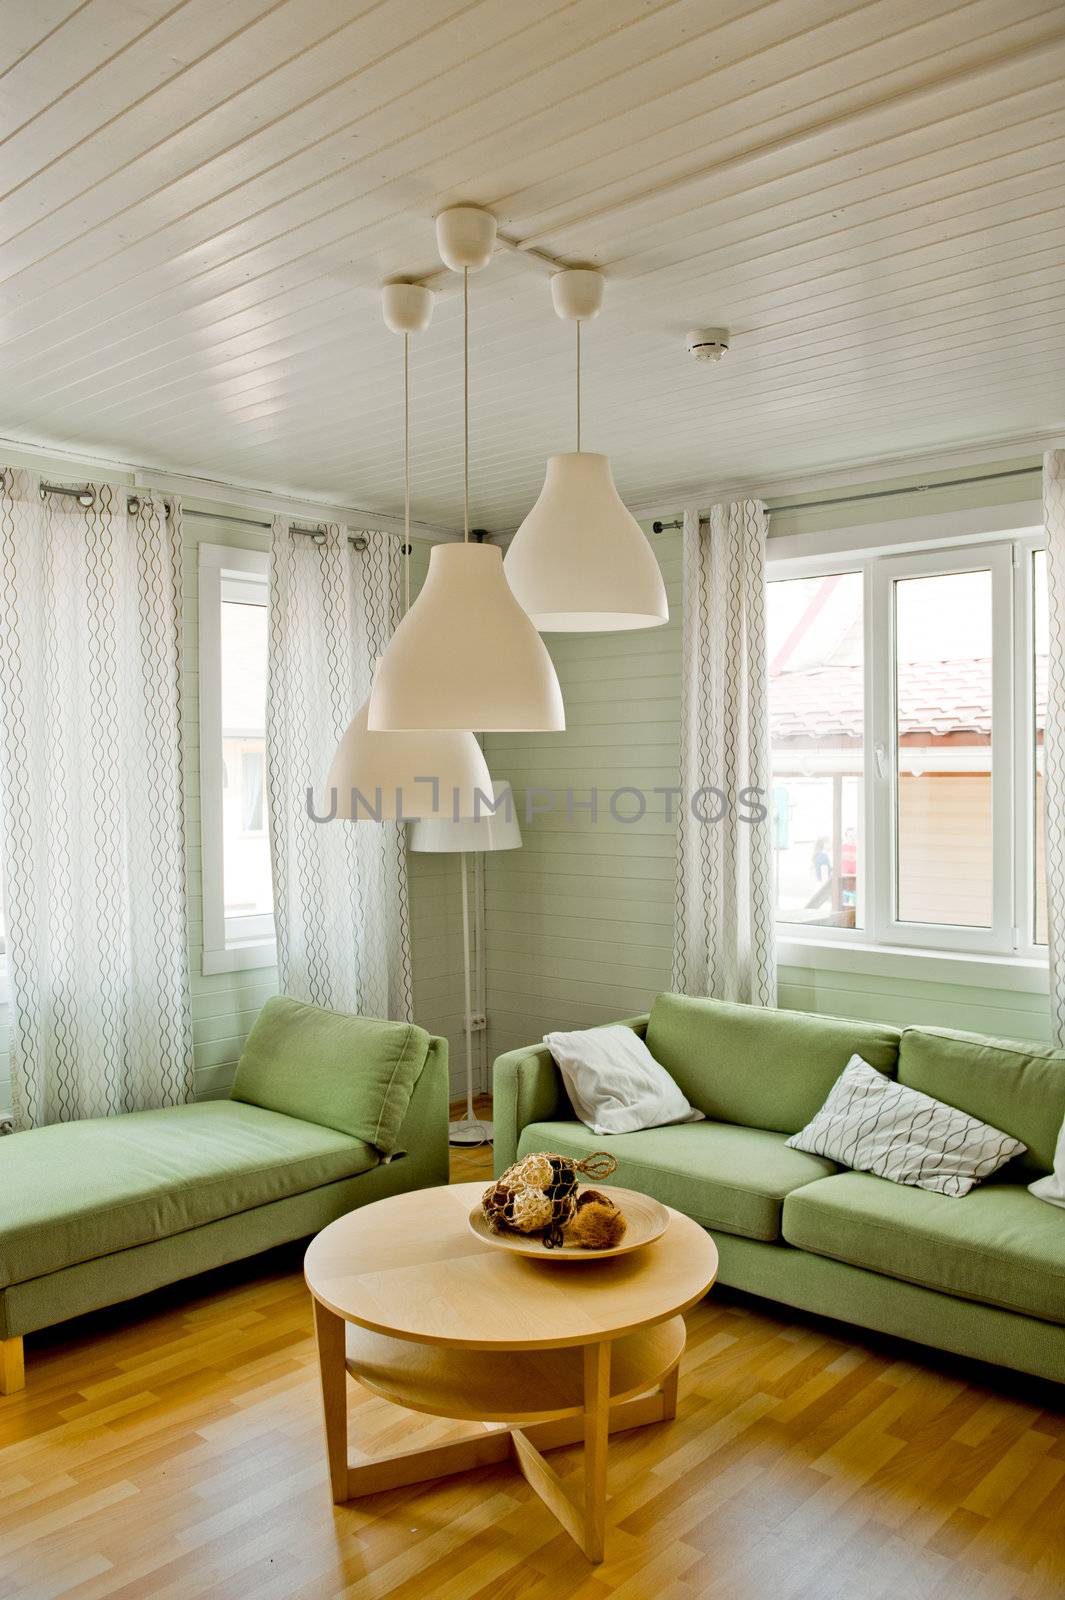 Privat house interior by Alenmax